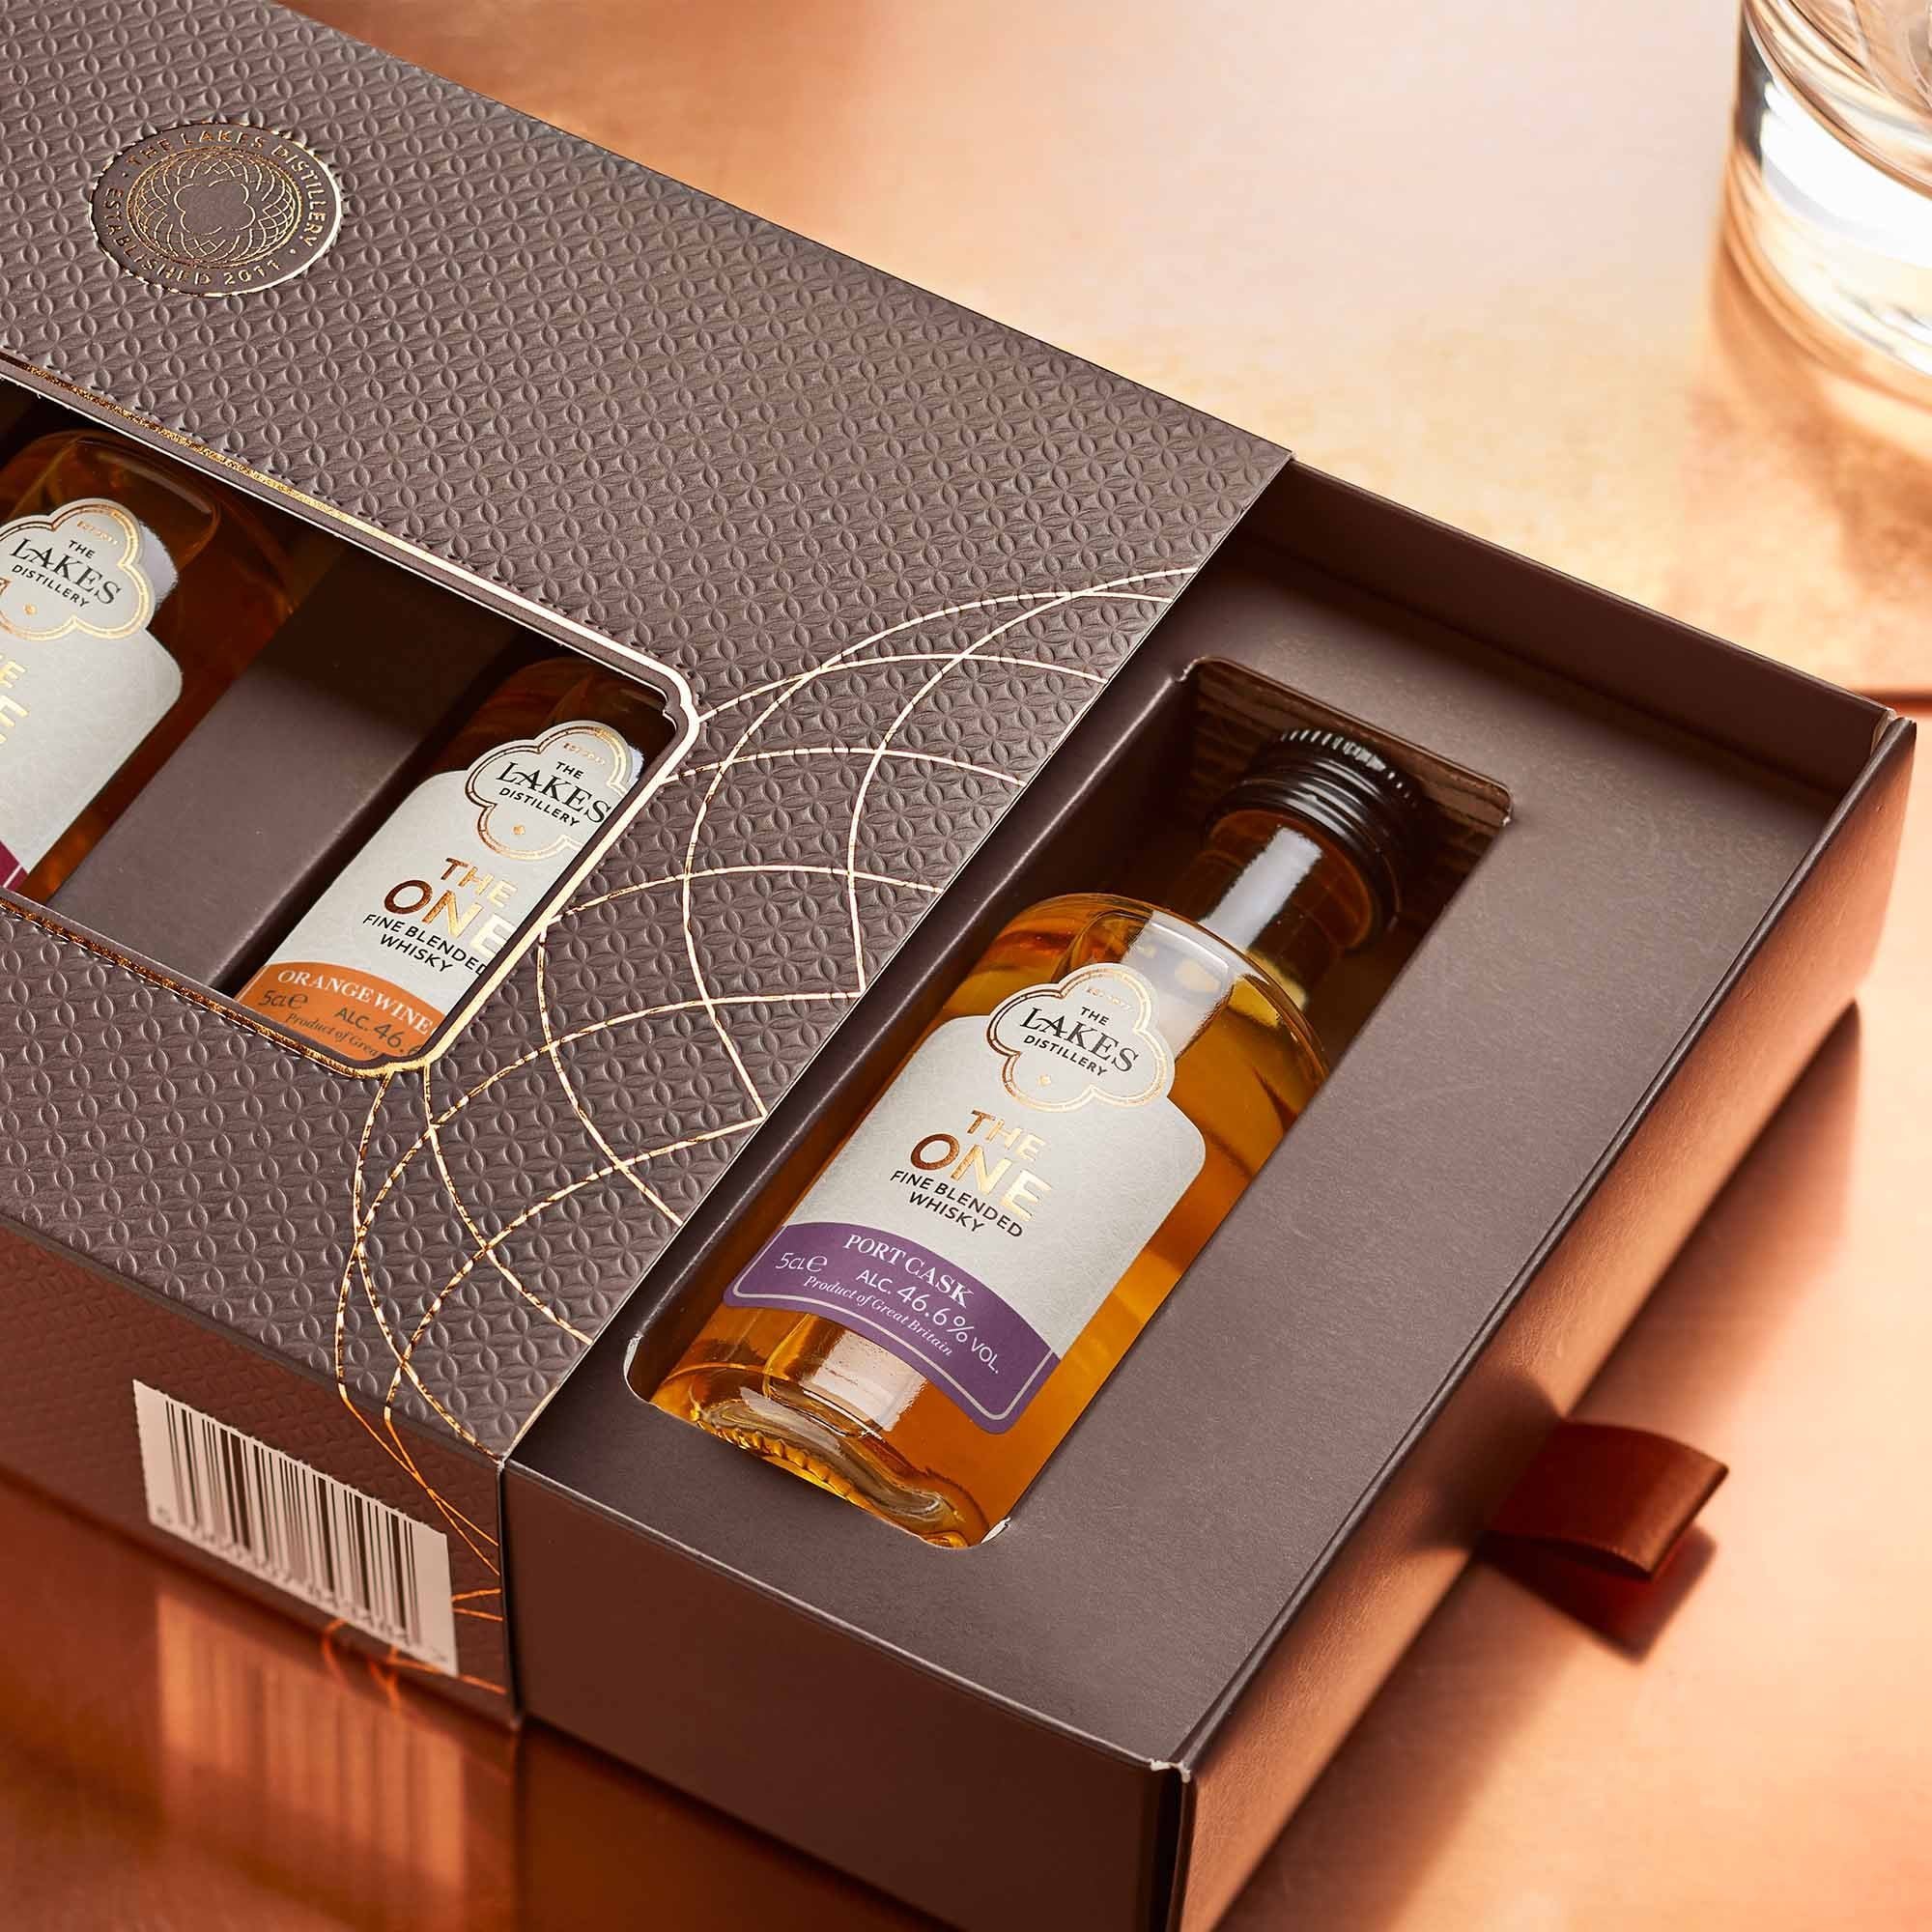 the-lakes-whisky-collection-5cl-gift-pack-p349-1637_zoom.jpg